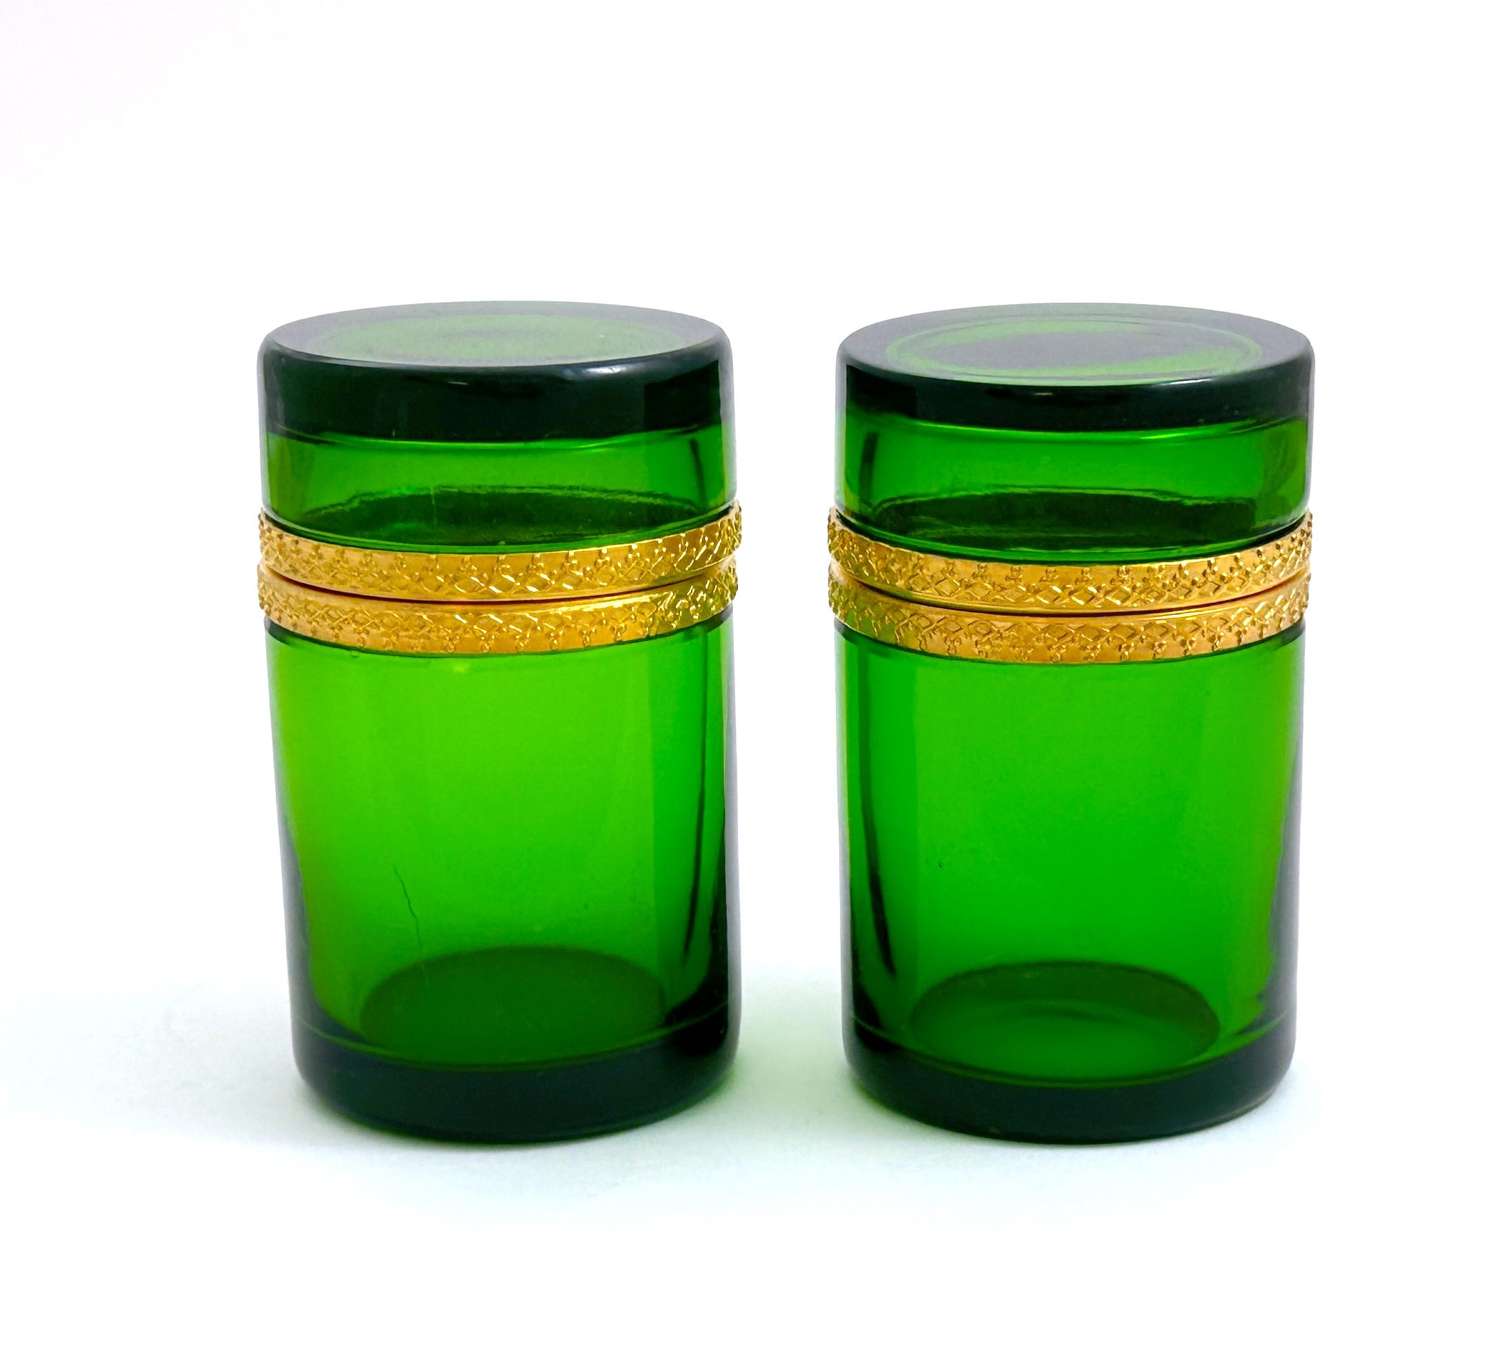 A Pair of Antique Green Crystal Glass Cylindrical Caskets